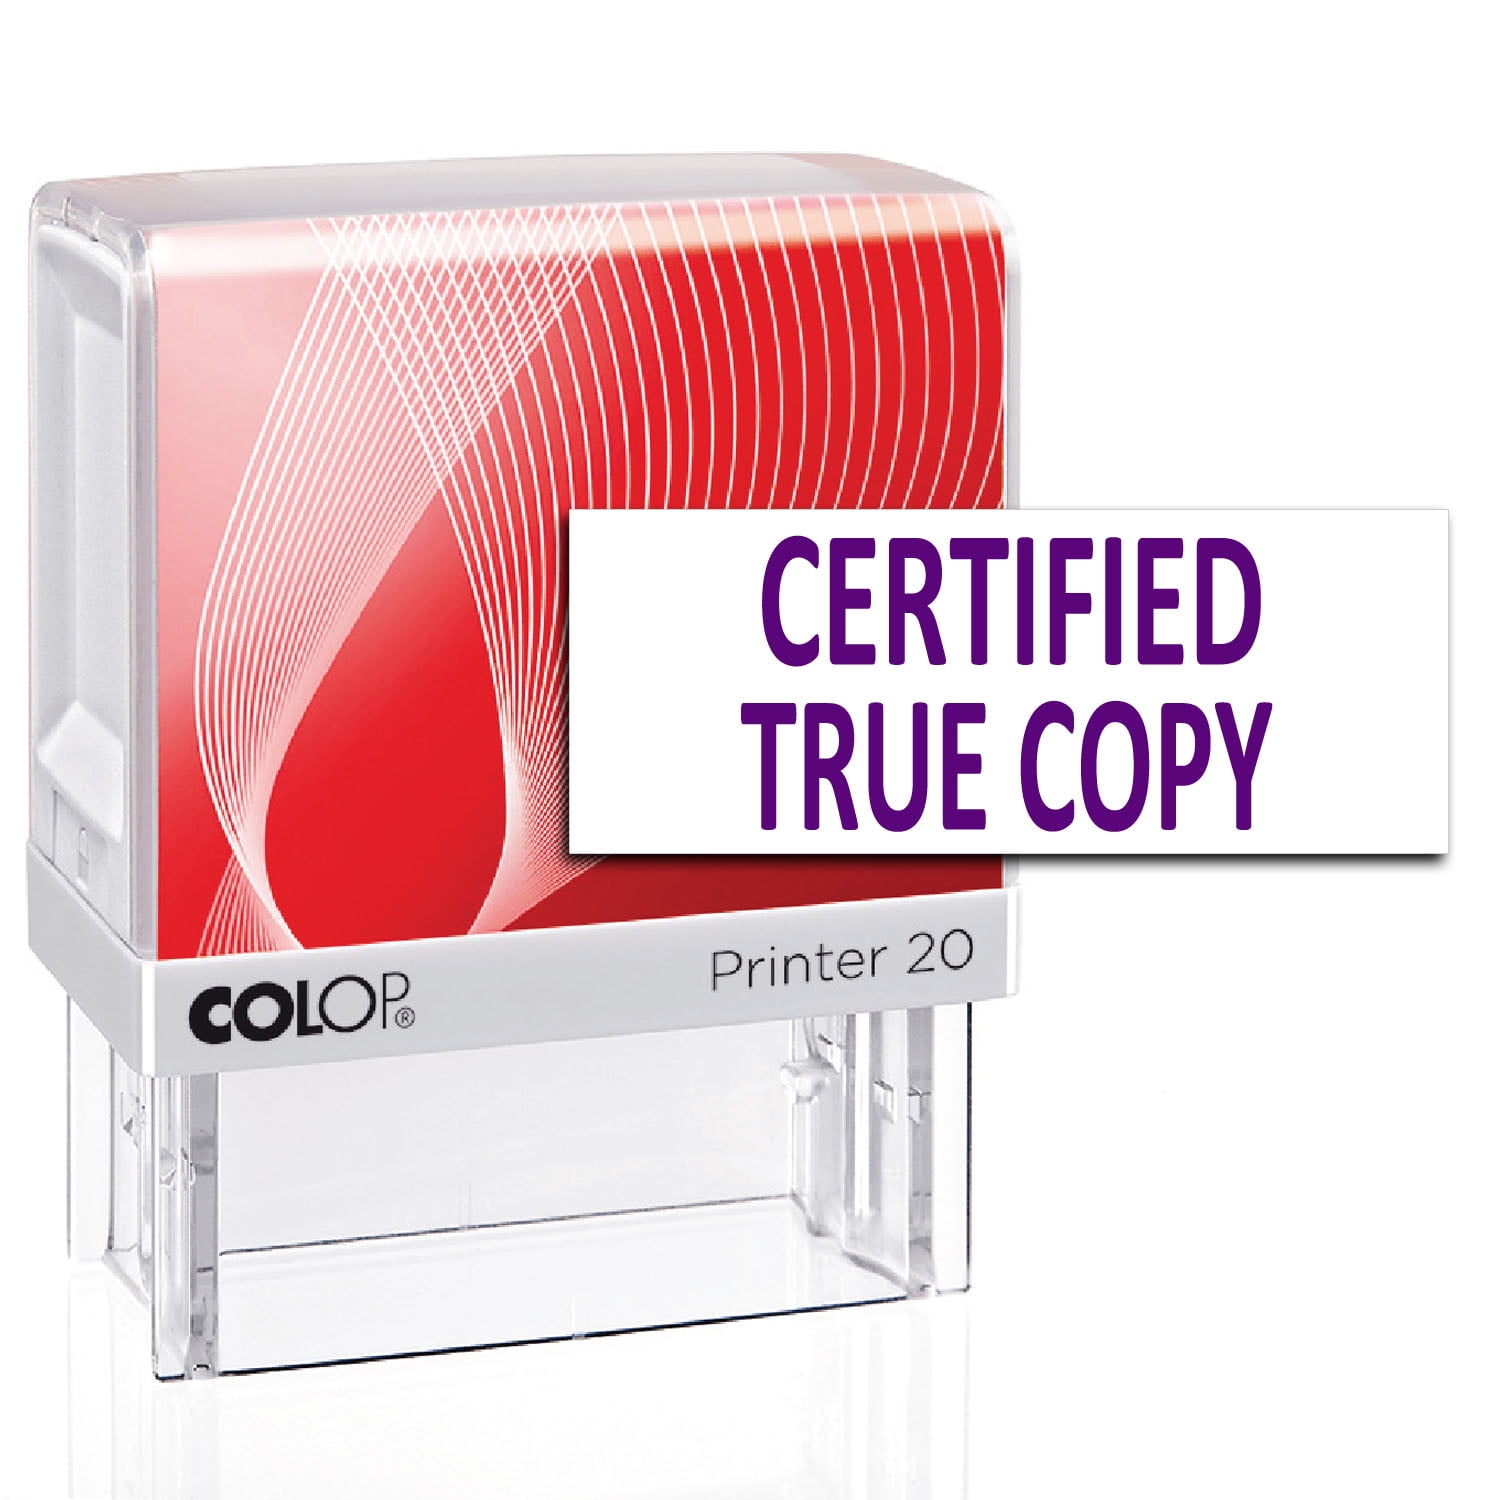 APPROVED Print Plastic Stamp Office and Commercial Use Colop Self-Inking  Stamp produits à prix discount Aftermarket Worry-libre Prix bas au magasin  